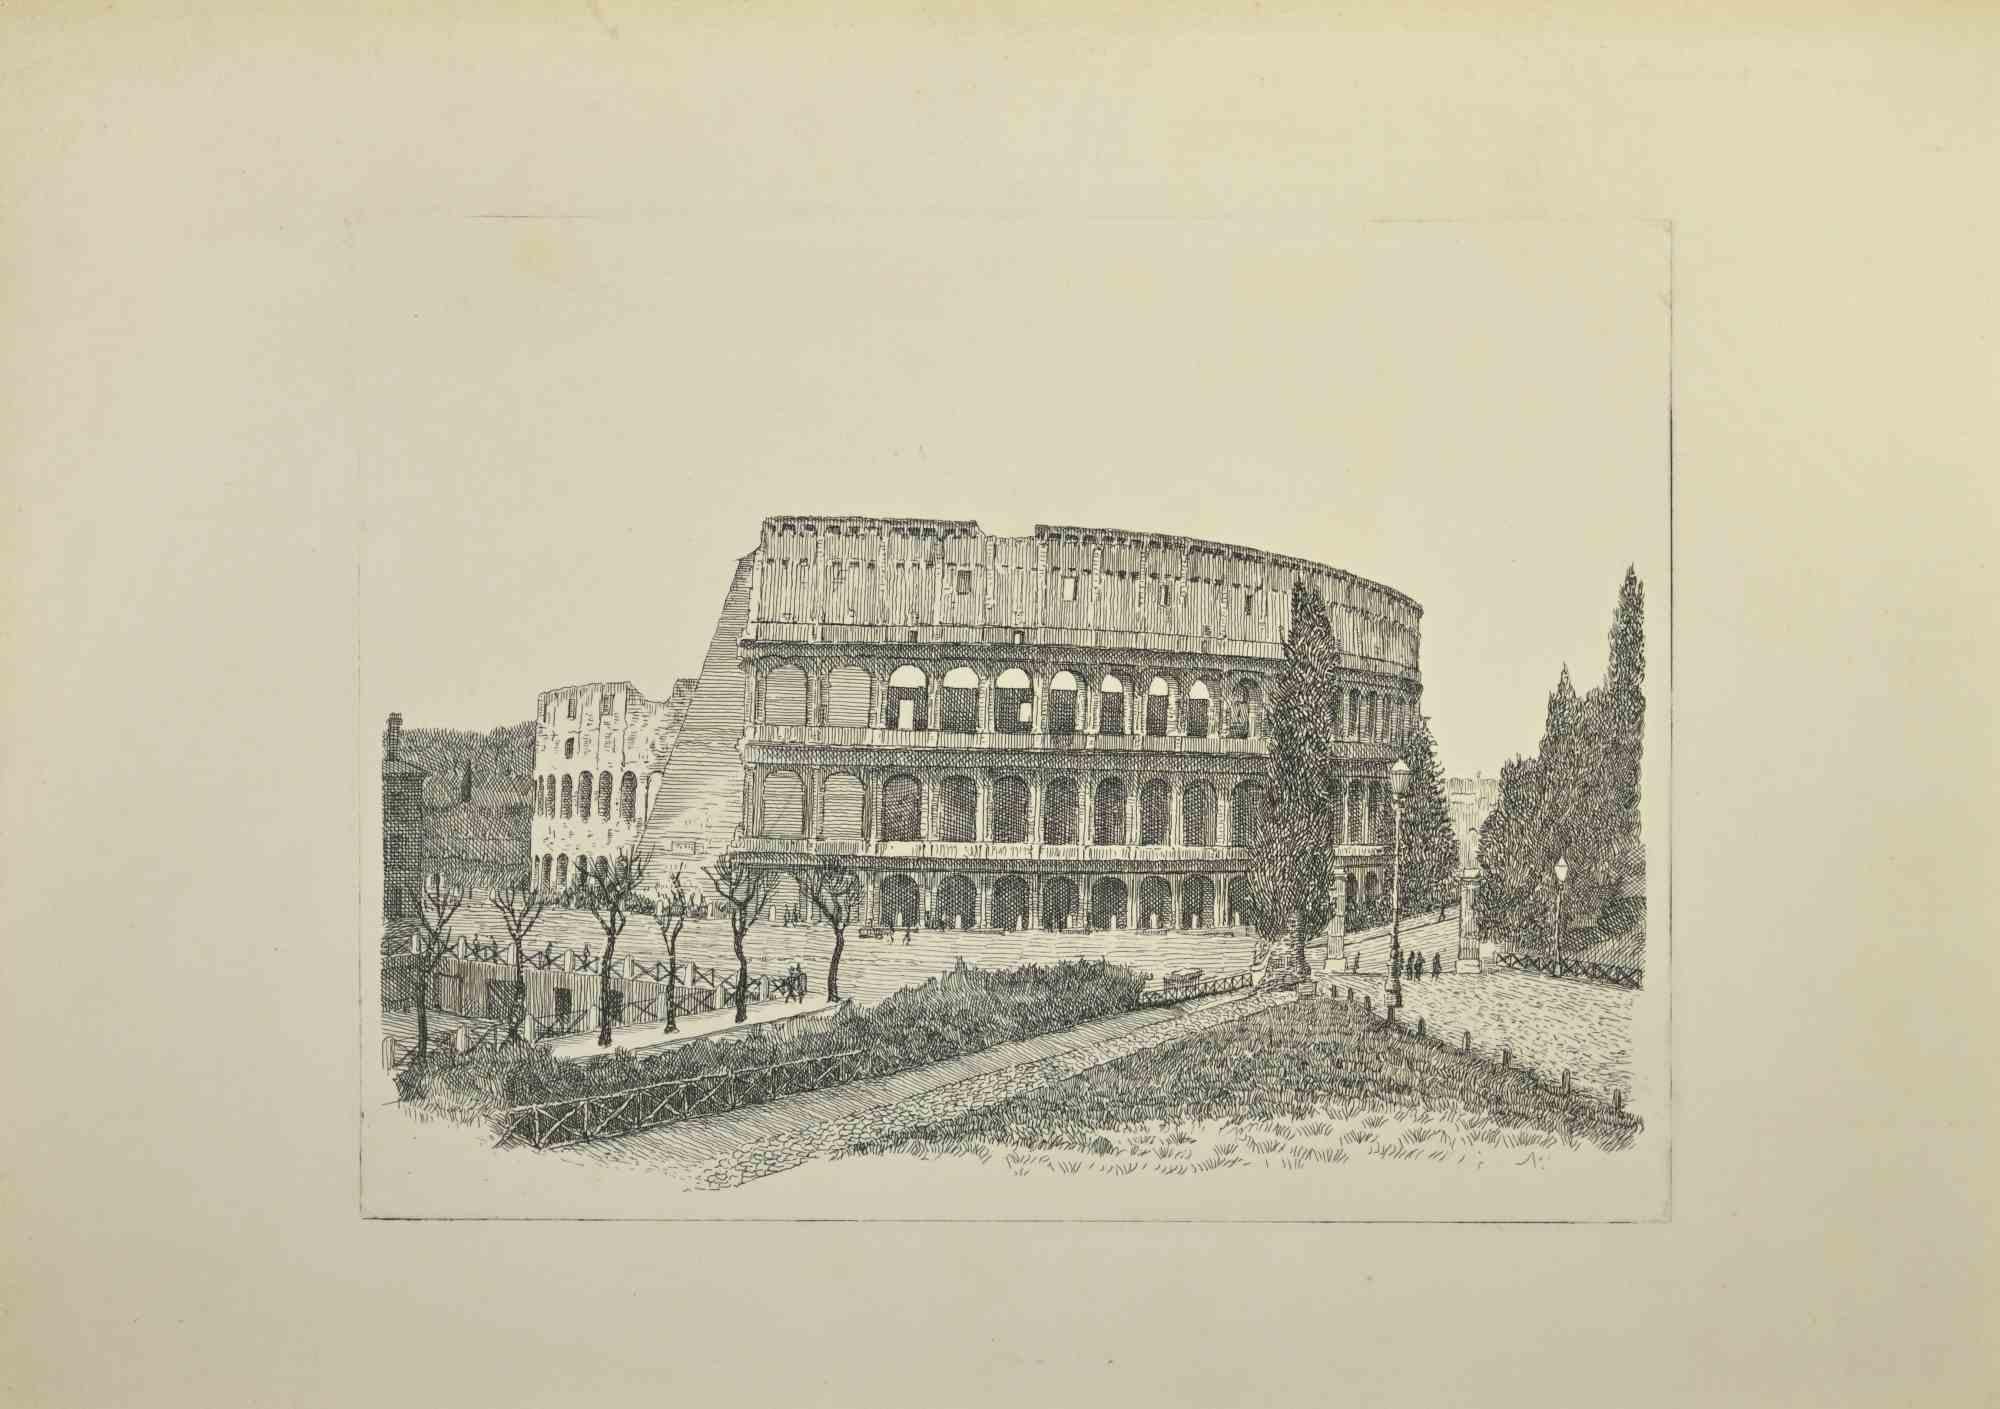 Colosseum is an artwork realized by Giuseppe Malandrino.

Print in etching technique.

Hand-signed by the artist in pencil on the lower right corner.

Numbered edition of 199 copies.

Good condition. 

This artwork represents the beautiful roman